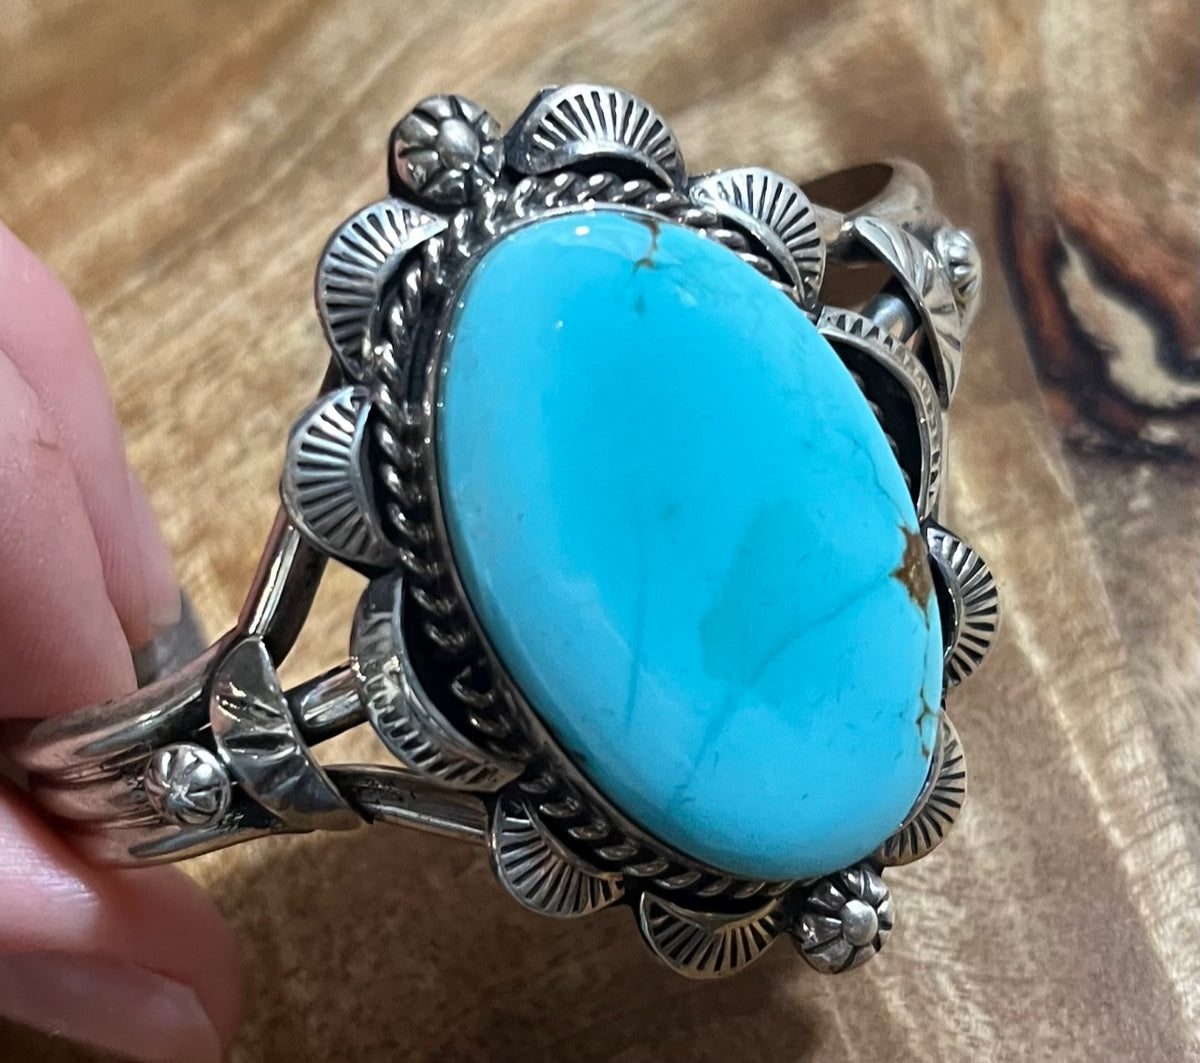 Turquoise | Authentic Turquoise Spider Web Cuff